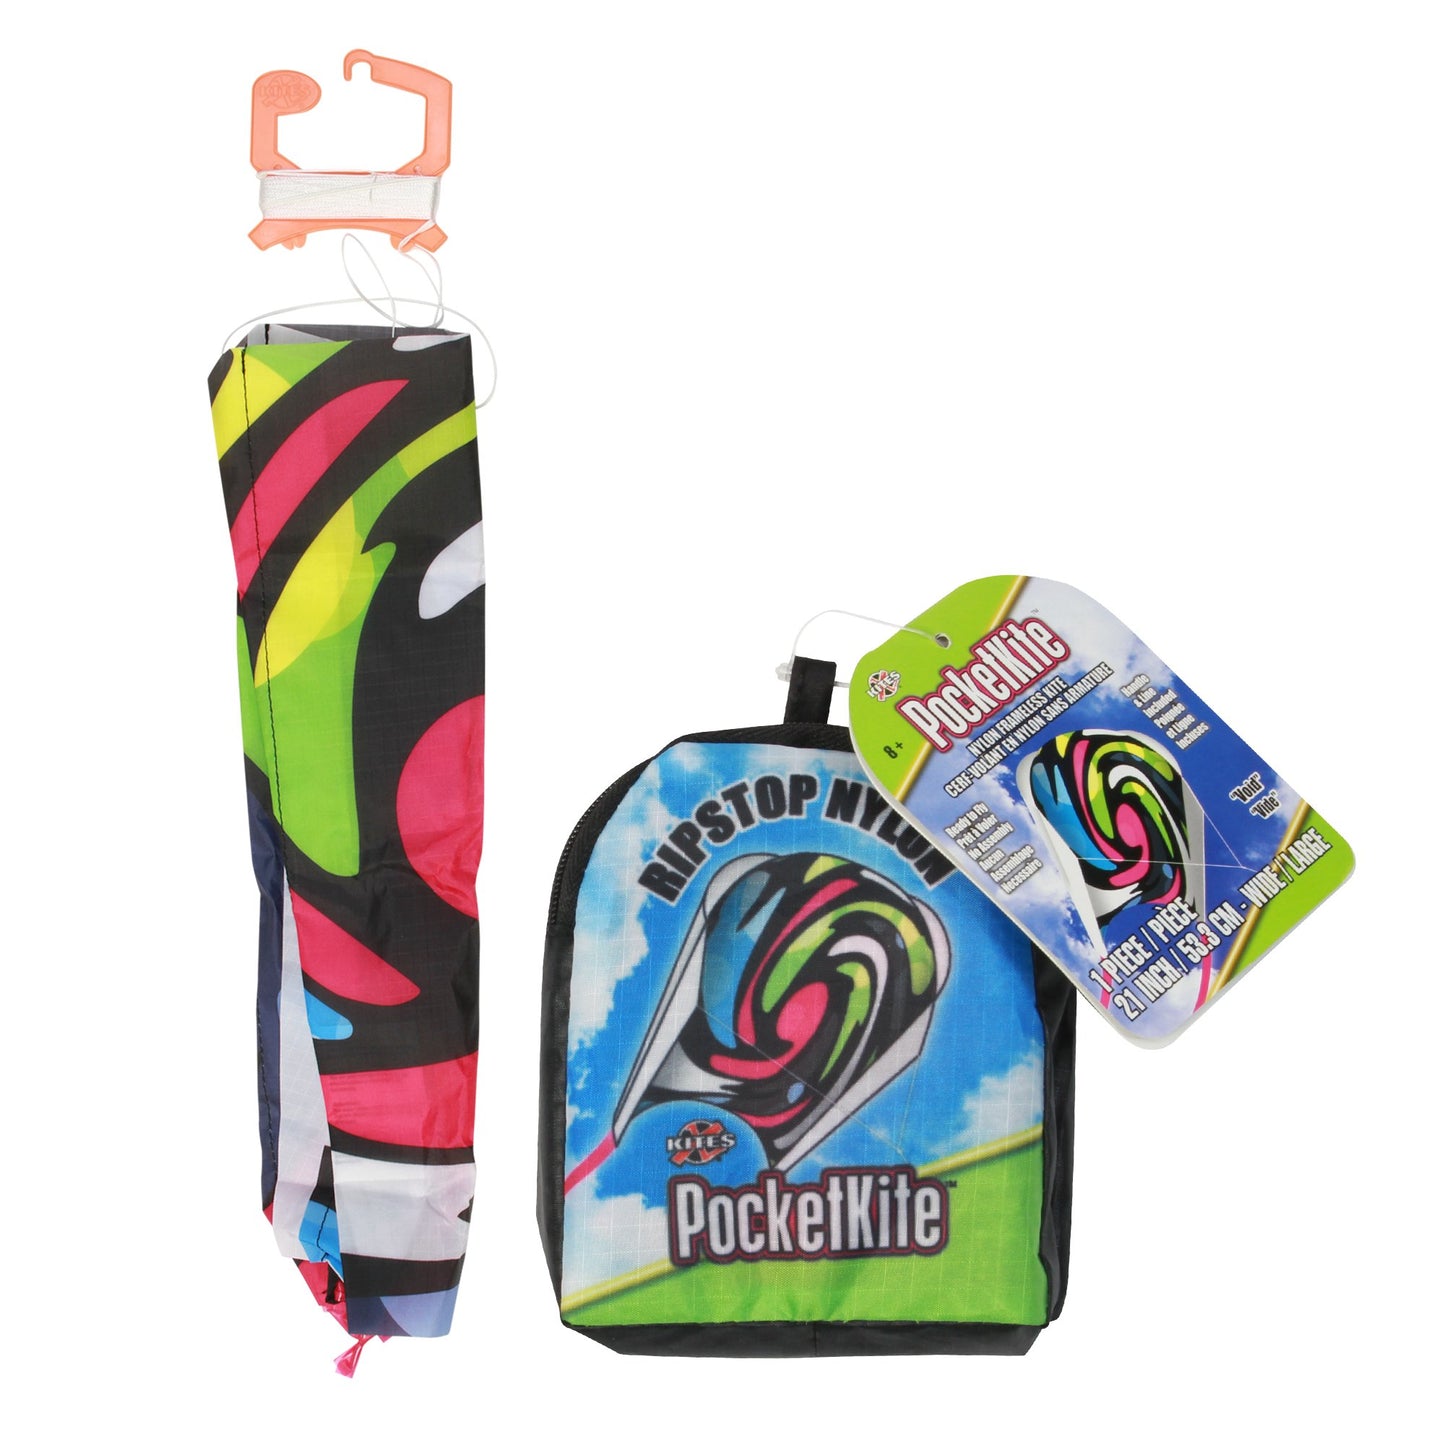 X Kites SkyFoil Waves + Pocket Kite Void Parafoil Kite Bundle - No Assembly Required dimensions